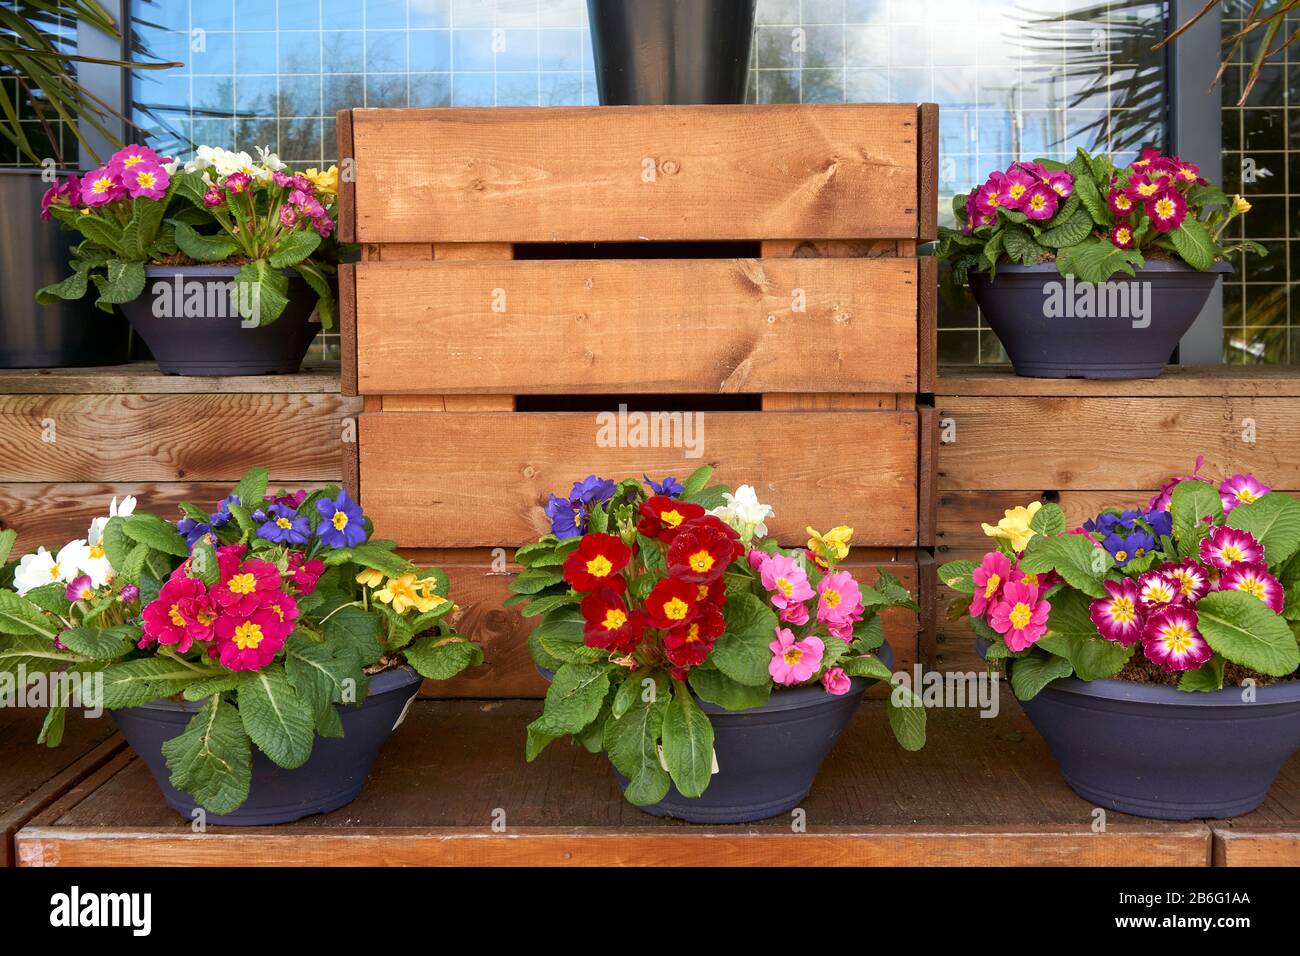 A display of potted primroses (primula) outside a store in spring Stock Photo